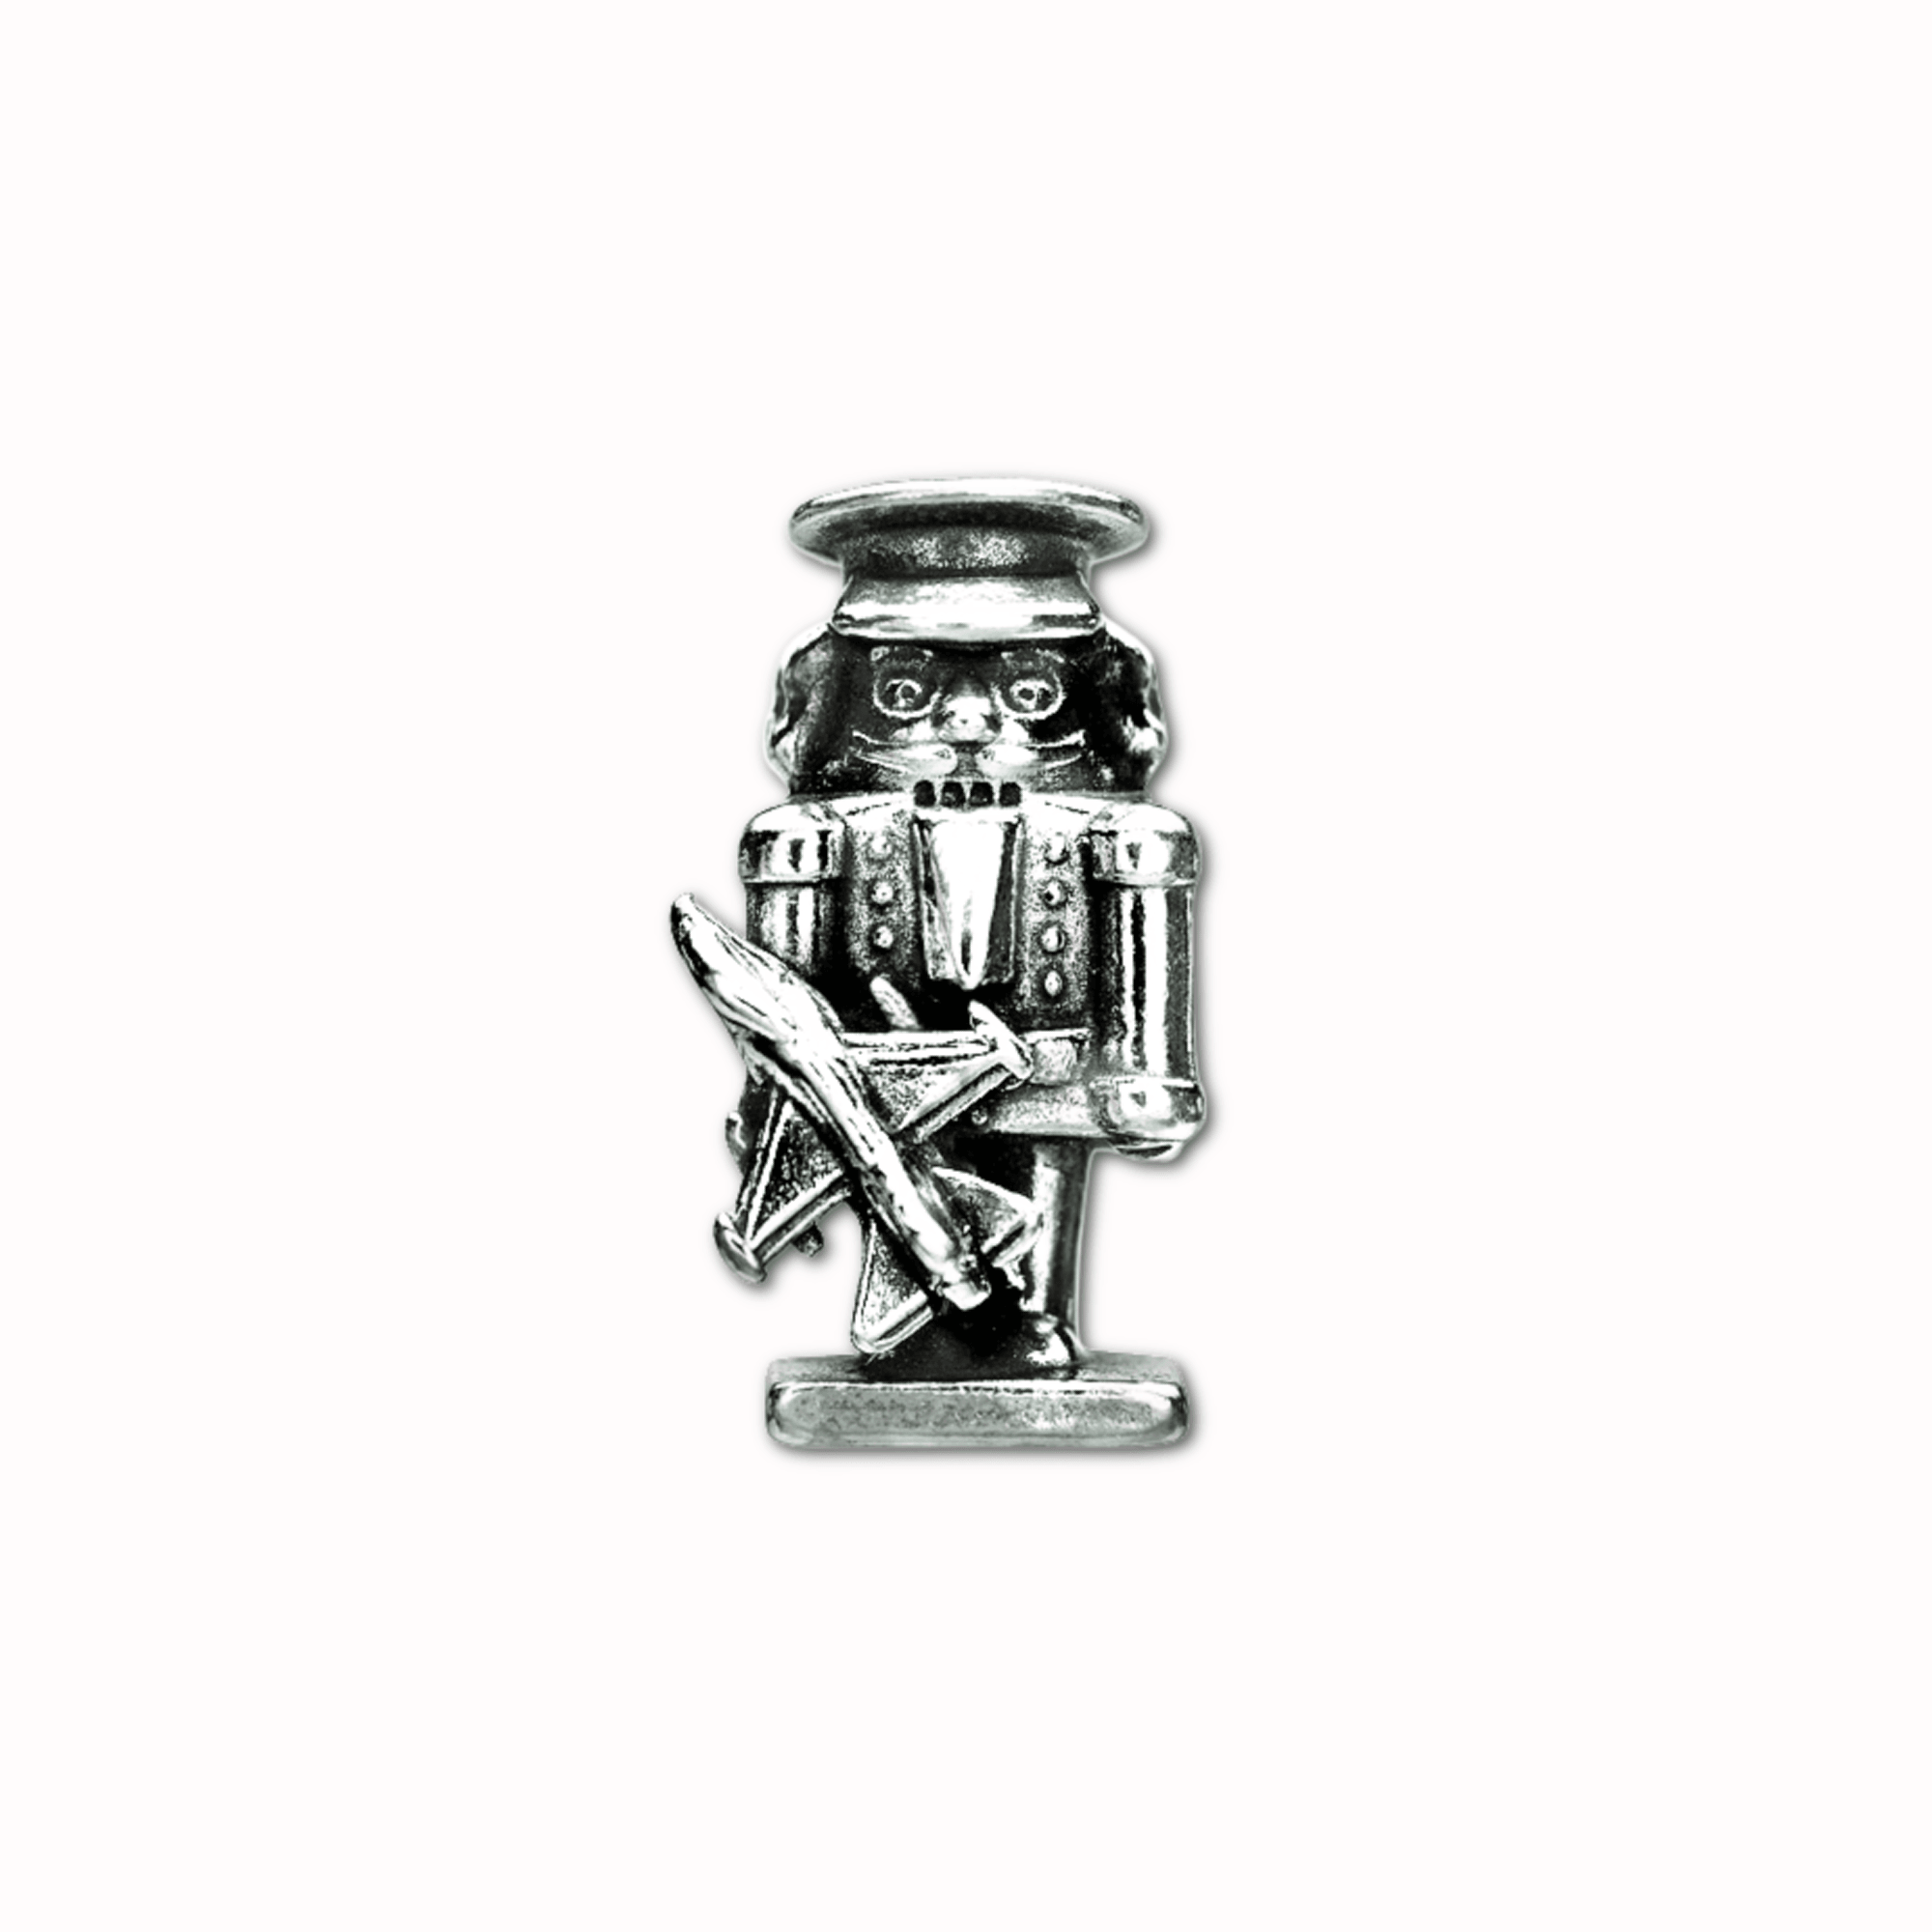 Military Jewelry, Military Charms, Military Gifts, USAF, United States Air Force, Nutcracker Airman, Christmas Spacer